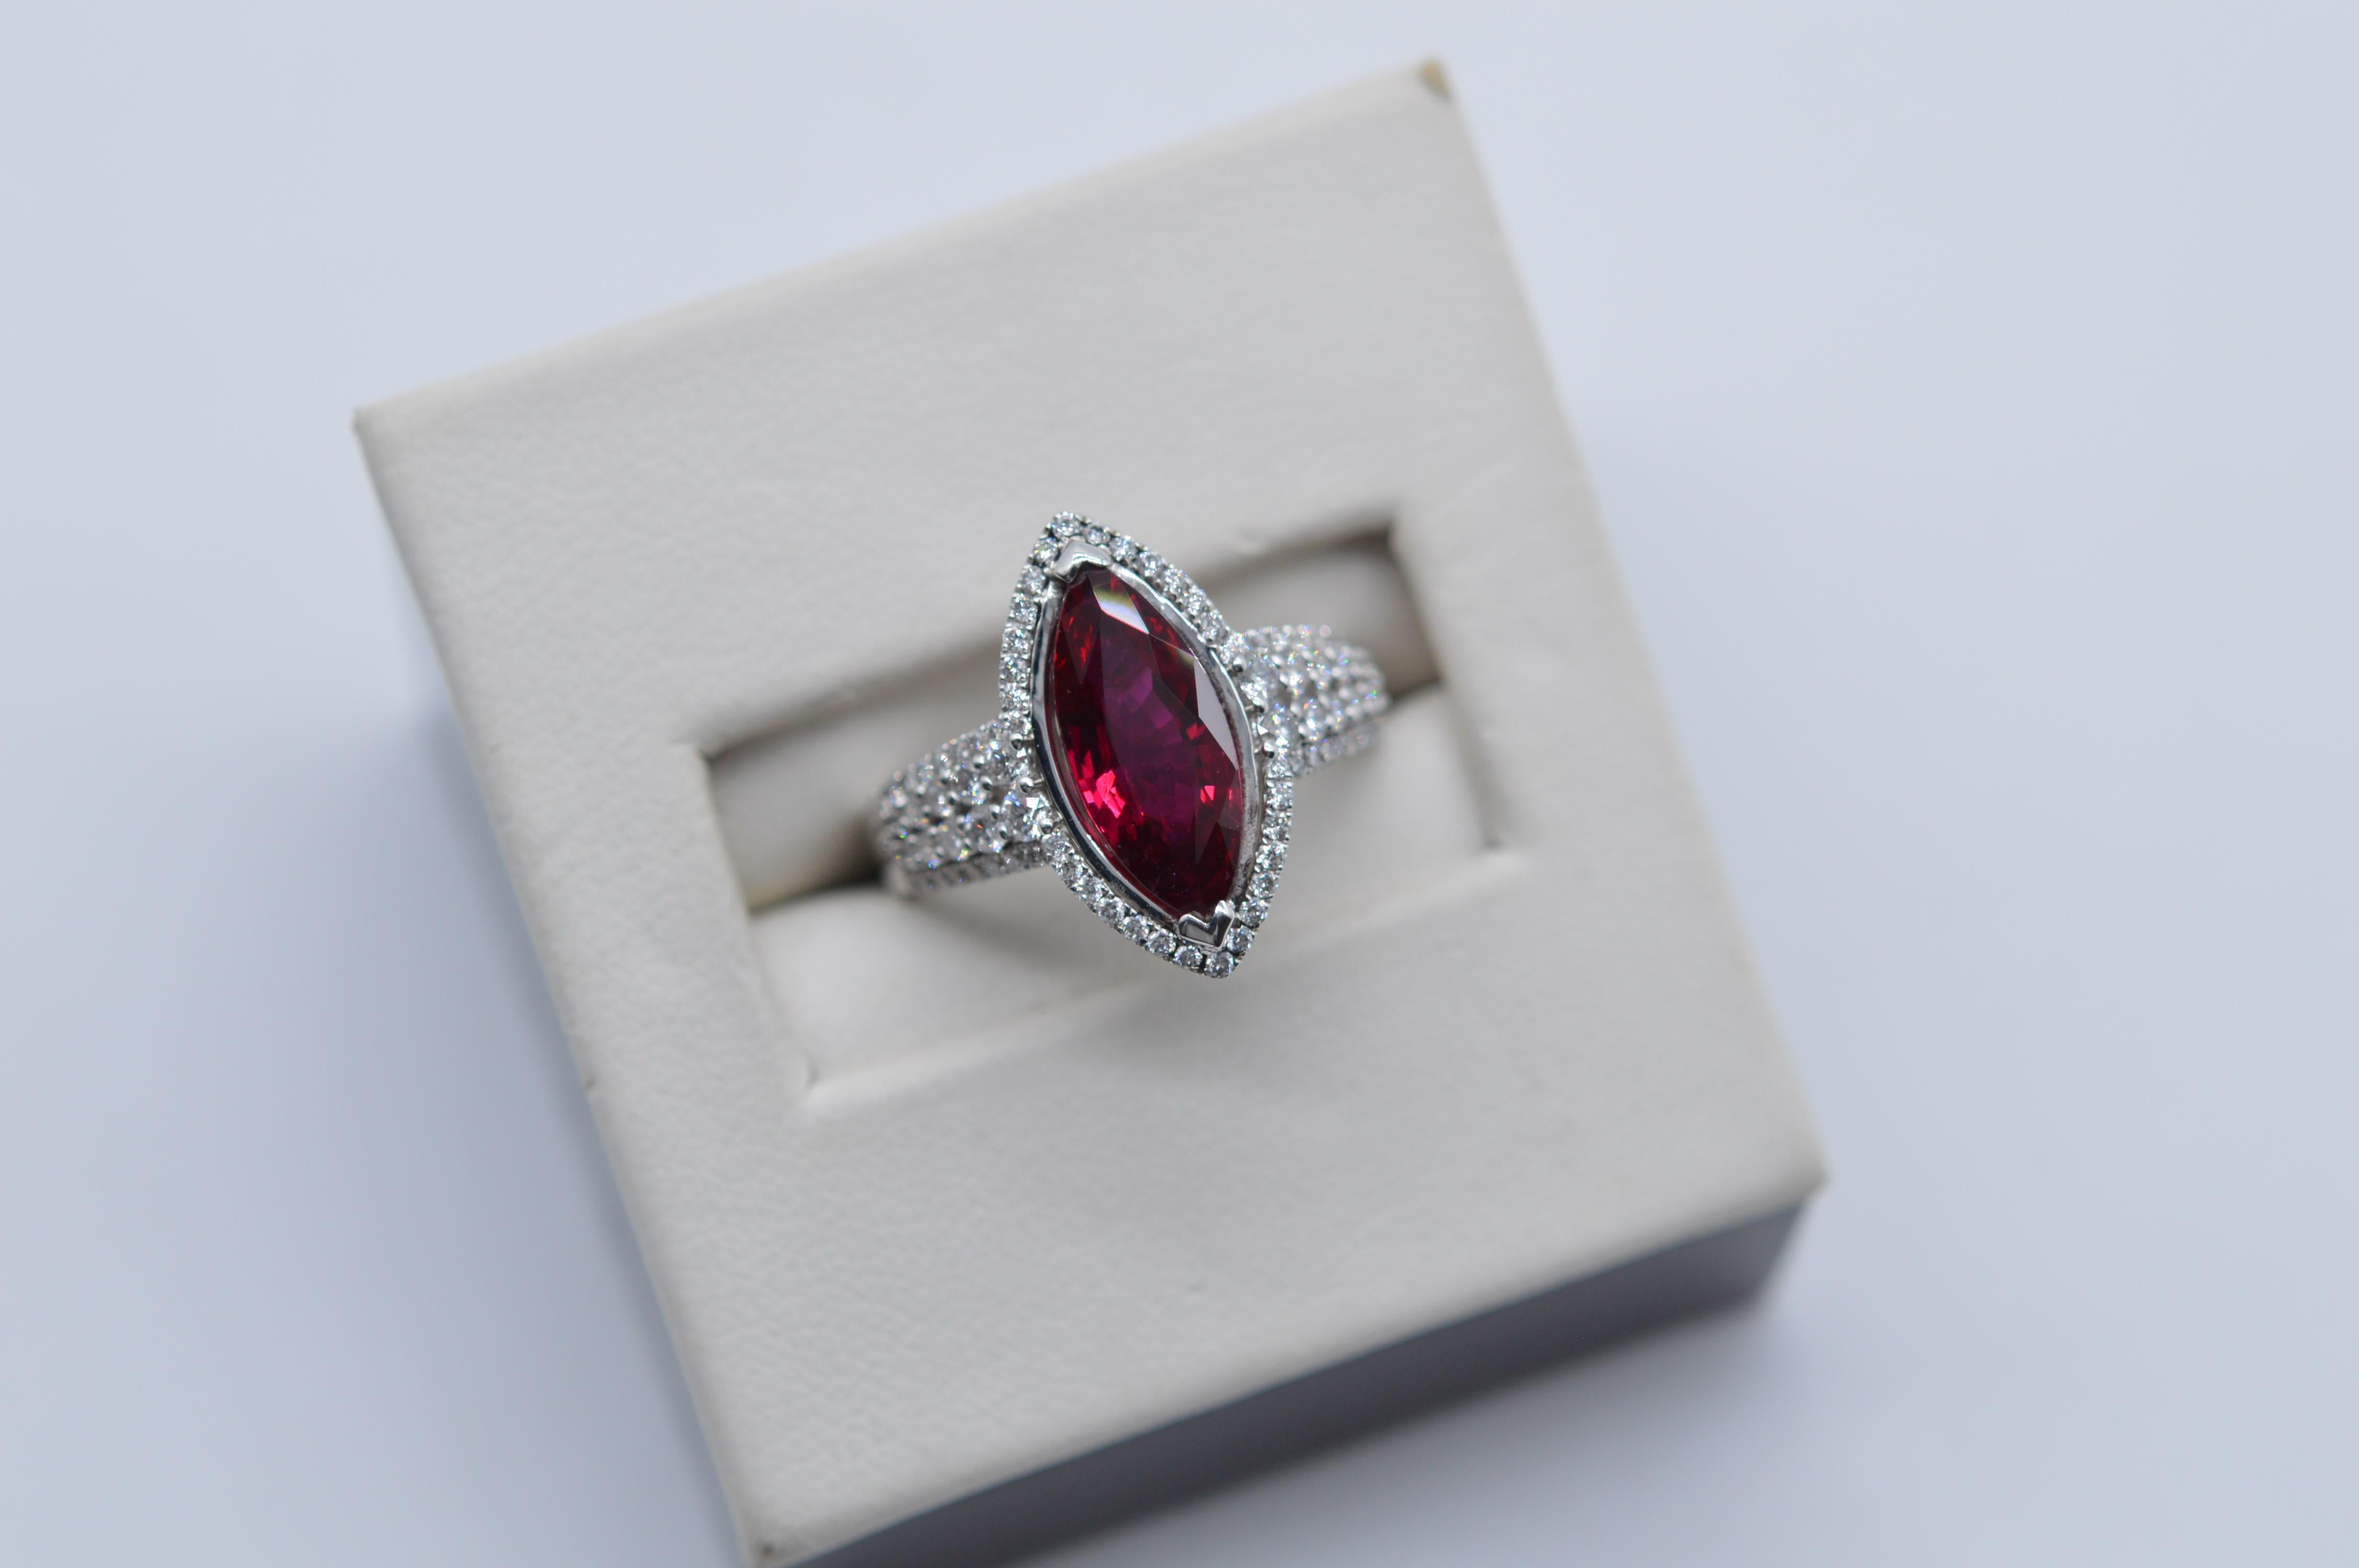 Siam Marquise Ruby Ring 2.95 Cts Heated C.Dunaigre Certified Unworn For Sale 5